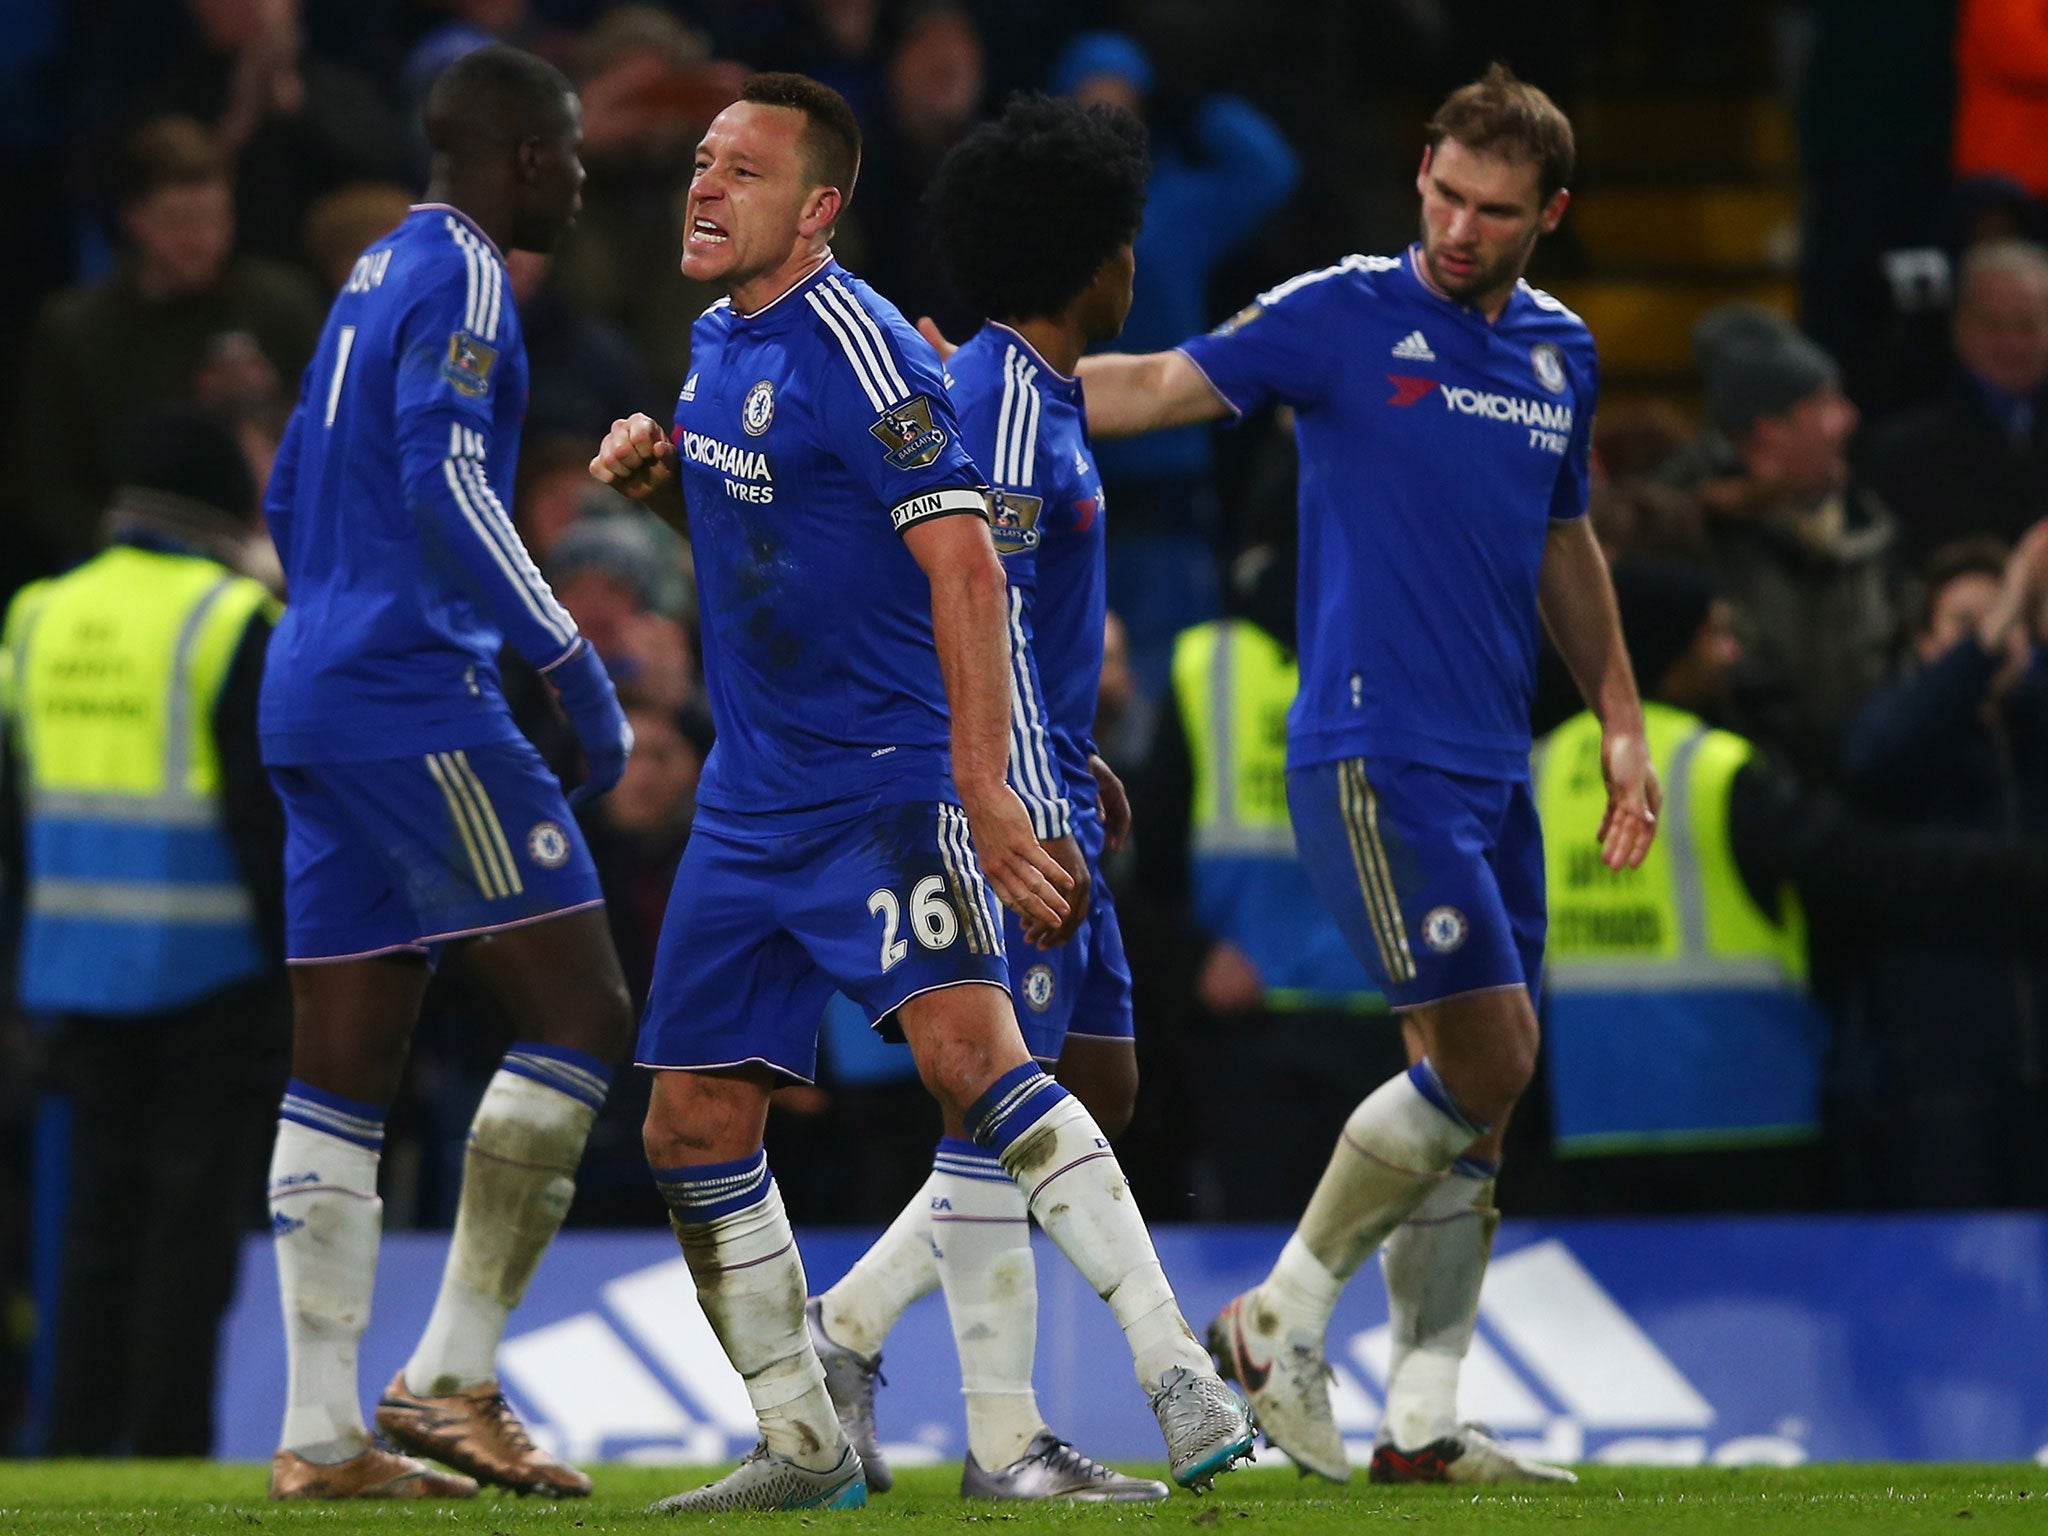 John Terry celebrates scoring a 98th-minute equaliser in the 3-3 draw between Chelsea and Everton